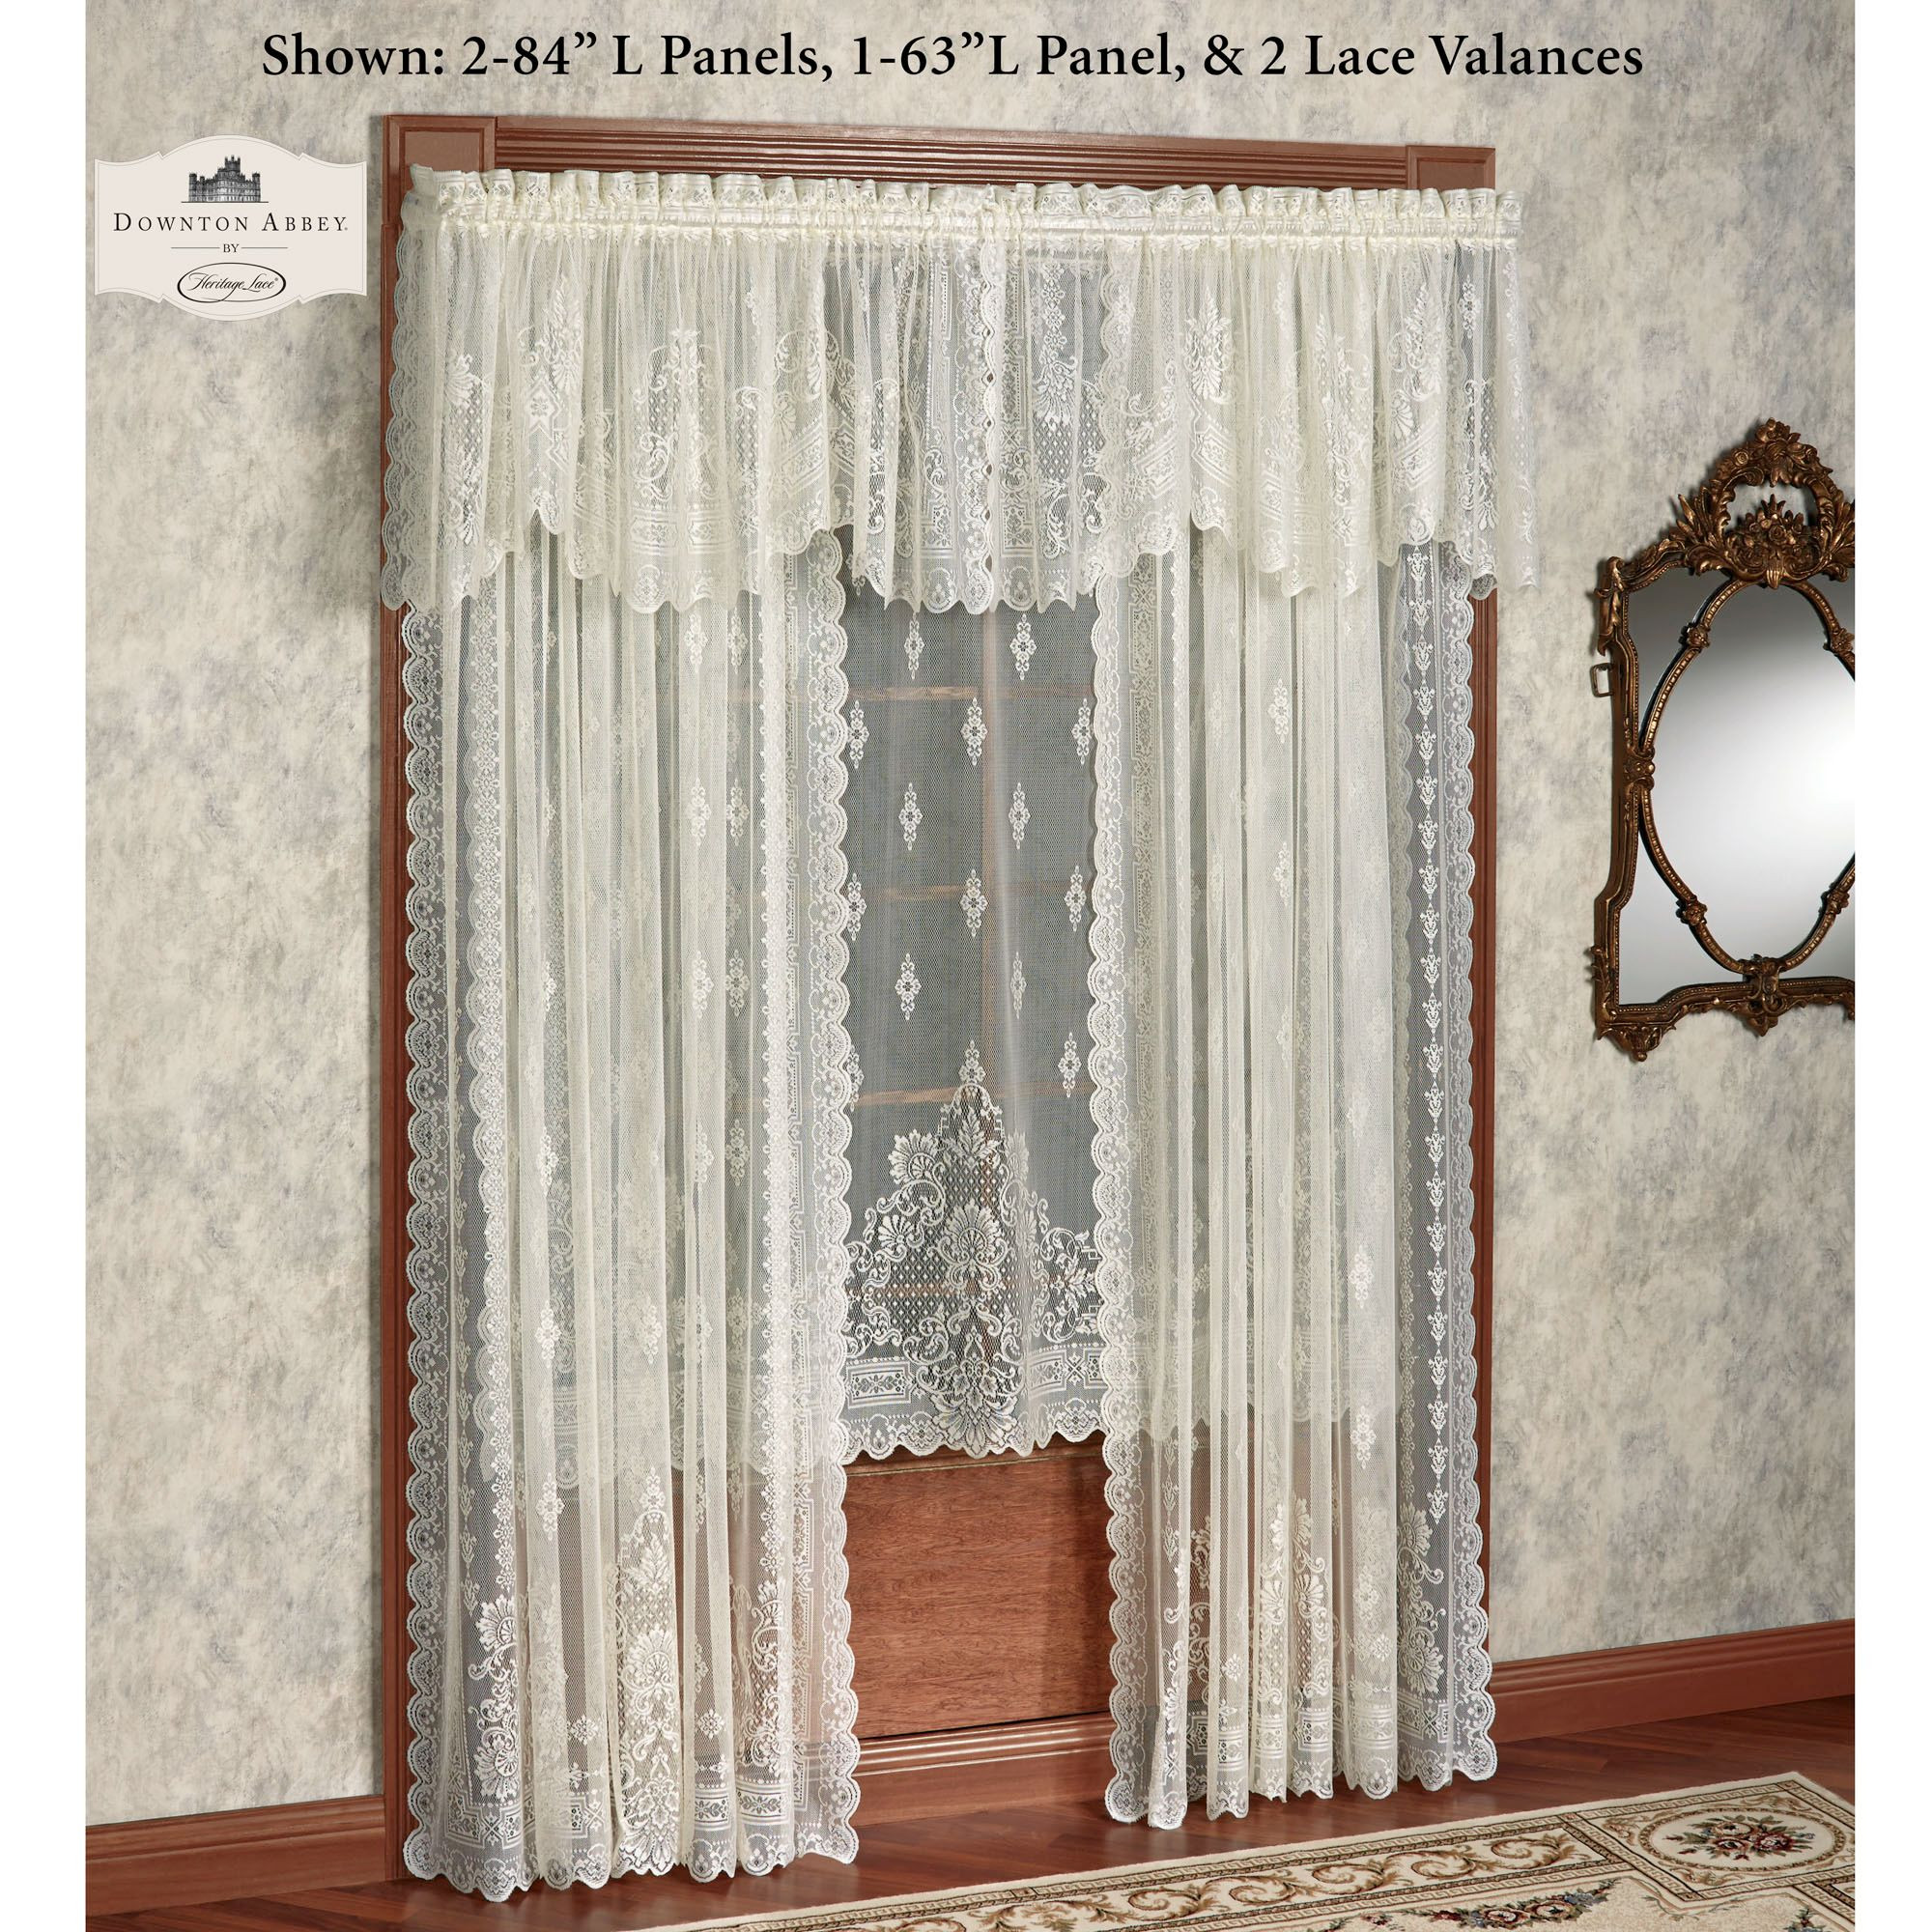 Jc Penneys Kitchen Curtains
 26 Jcpenney Curtain Sconces Decor Enchanting Jcpenney